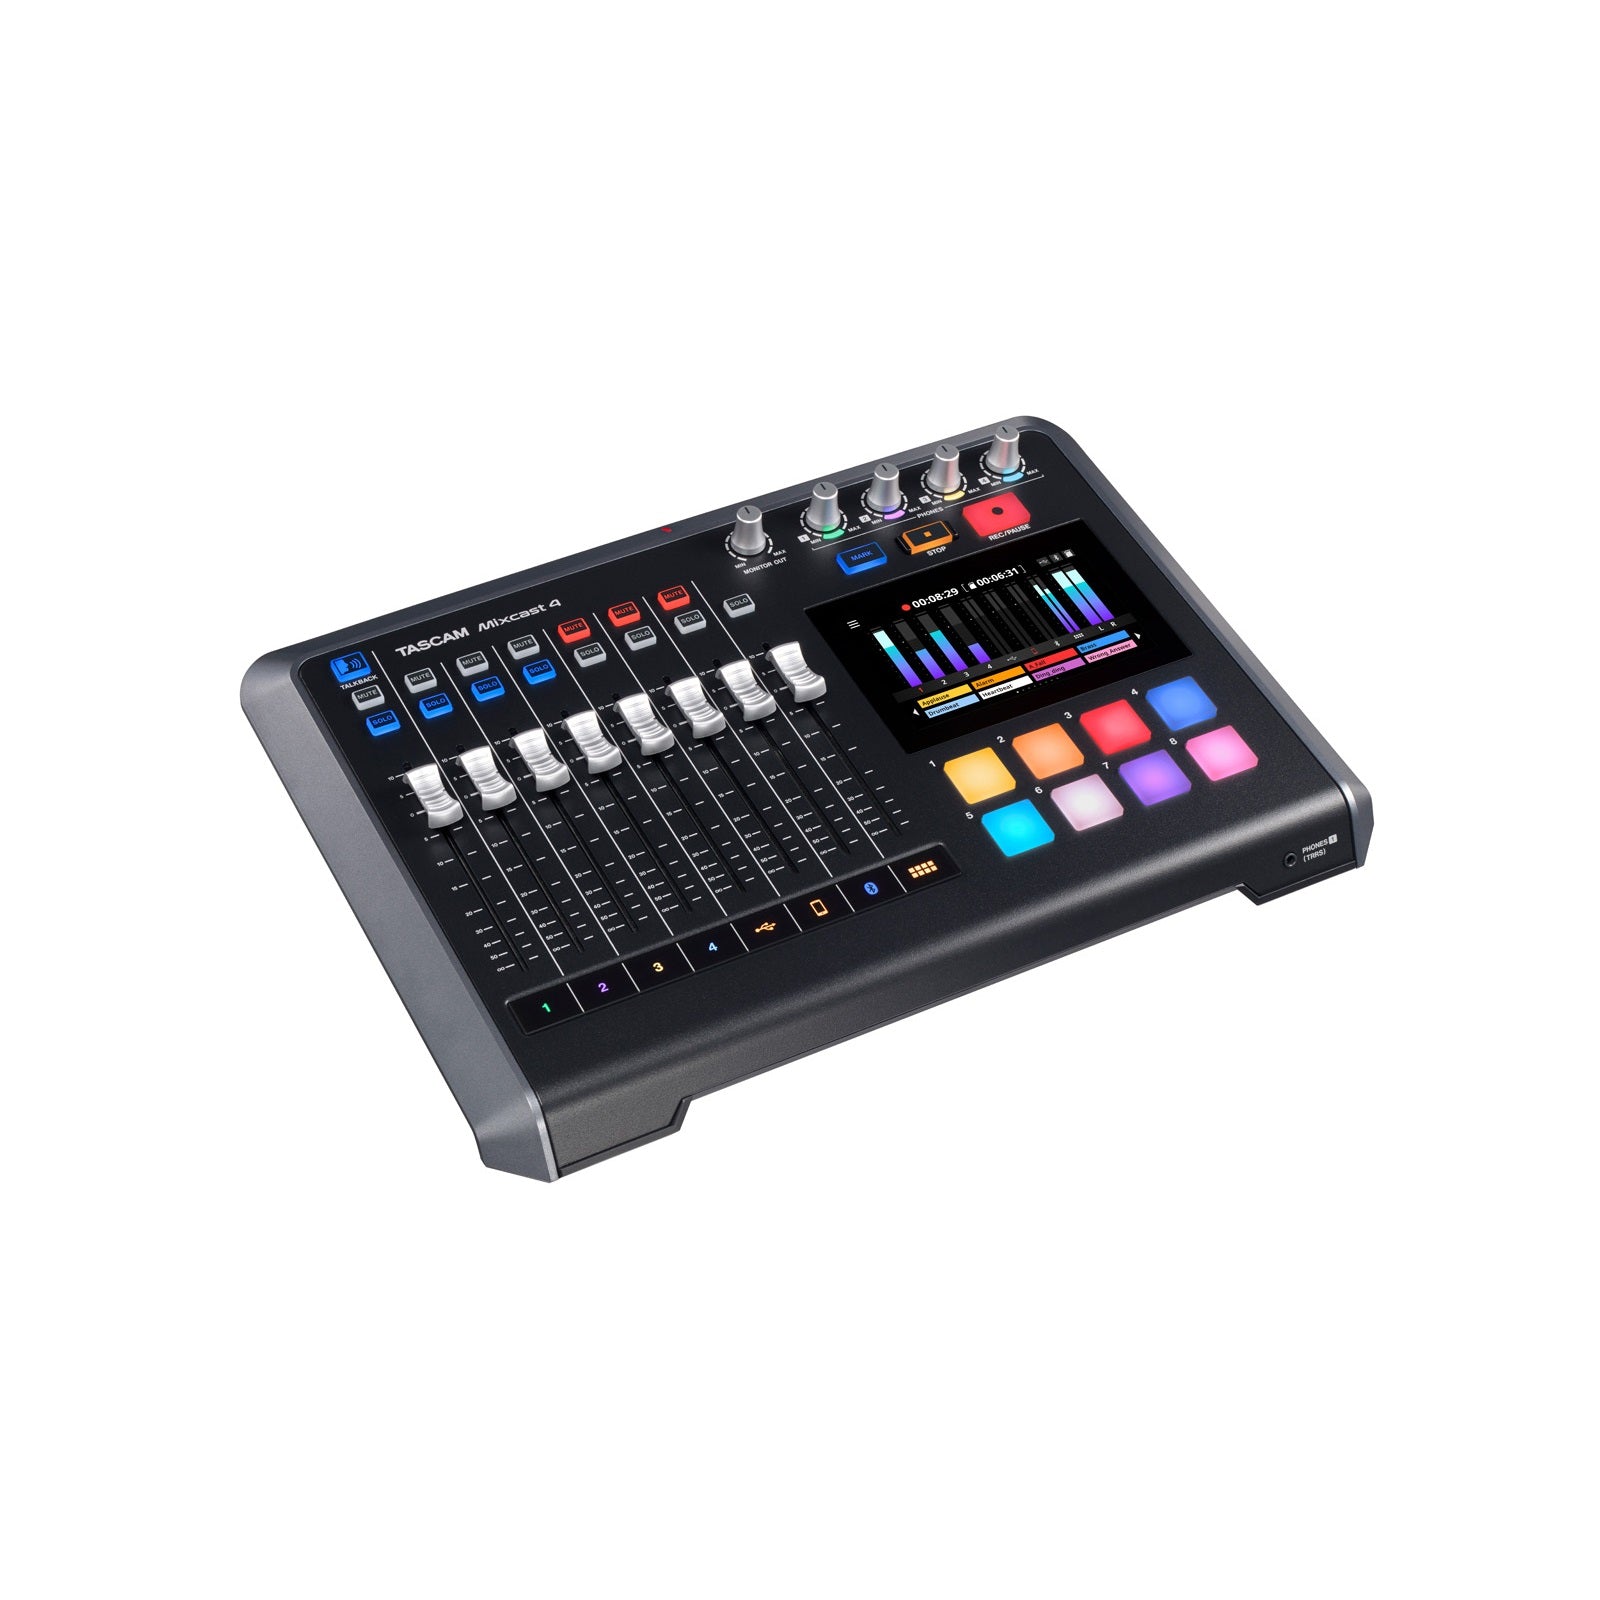 Image 4 of Tascam Mixcast 4 Podcast Station / Recorder / USB Audio Interface - SKU# MIXCAST4 : Product Type Recording Equipment & Accessories : Elderly Instruments